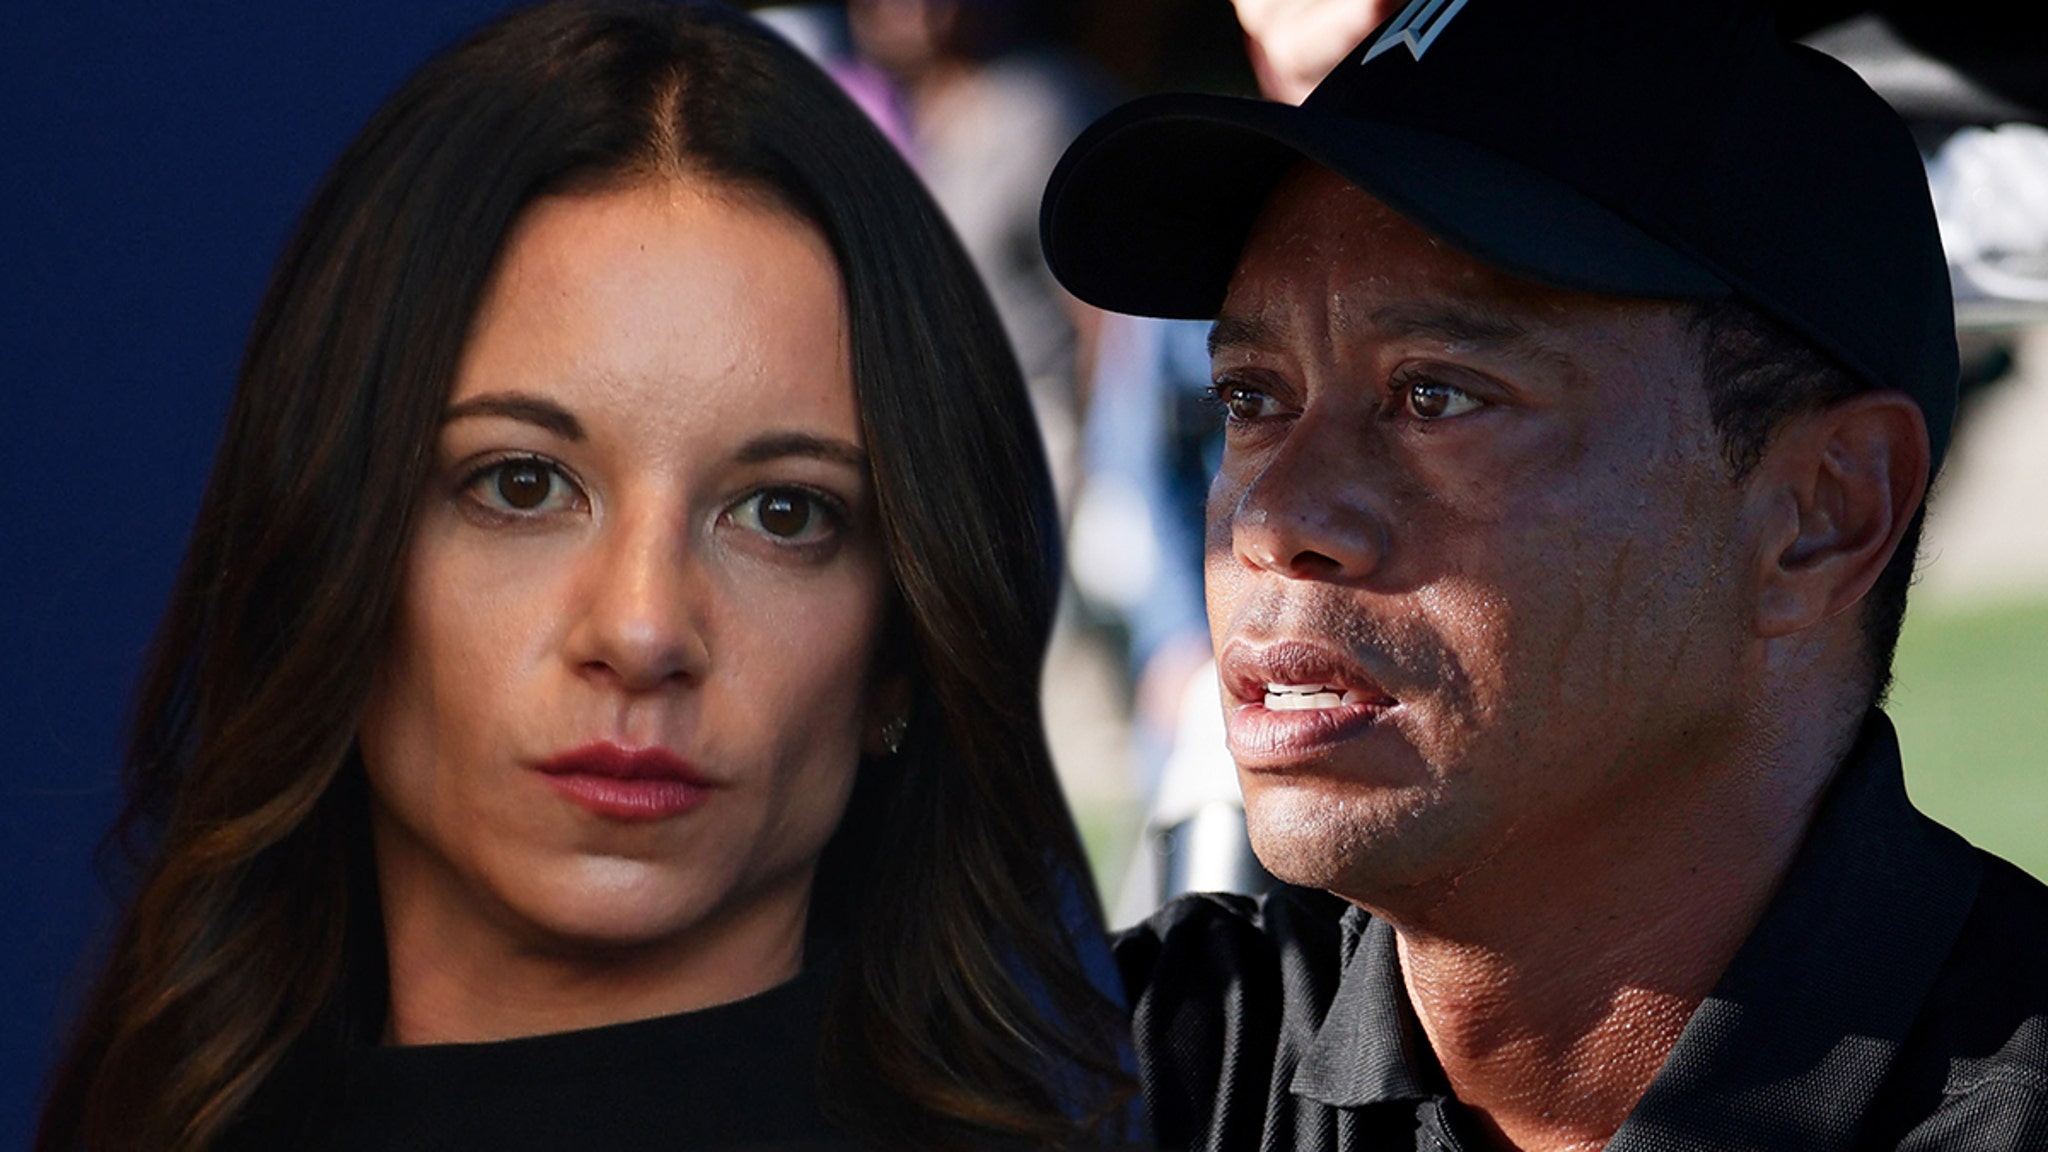 Tiger Woods’ Ex-Girlfriend Wants NDA Nullified, Cites Sexual Assault, Harassment Law